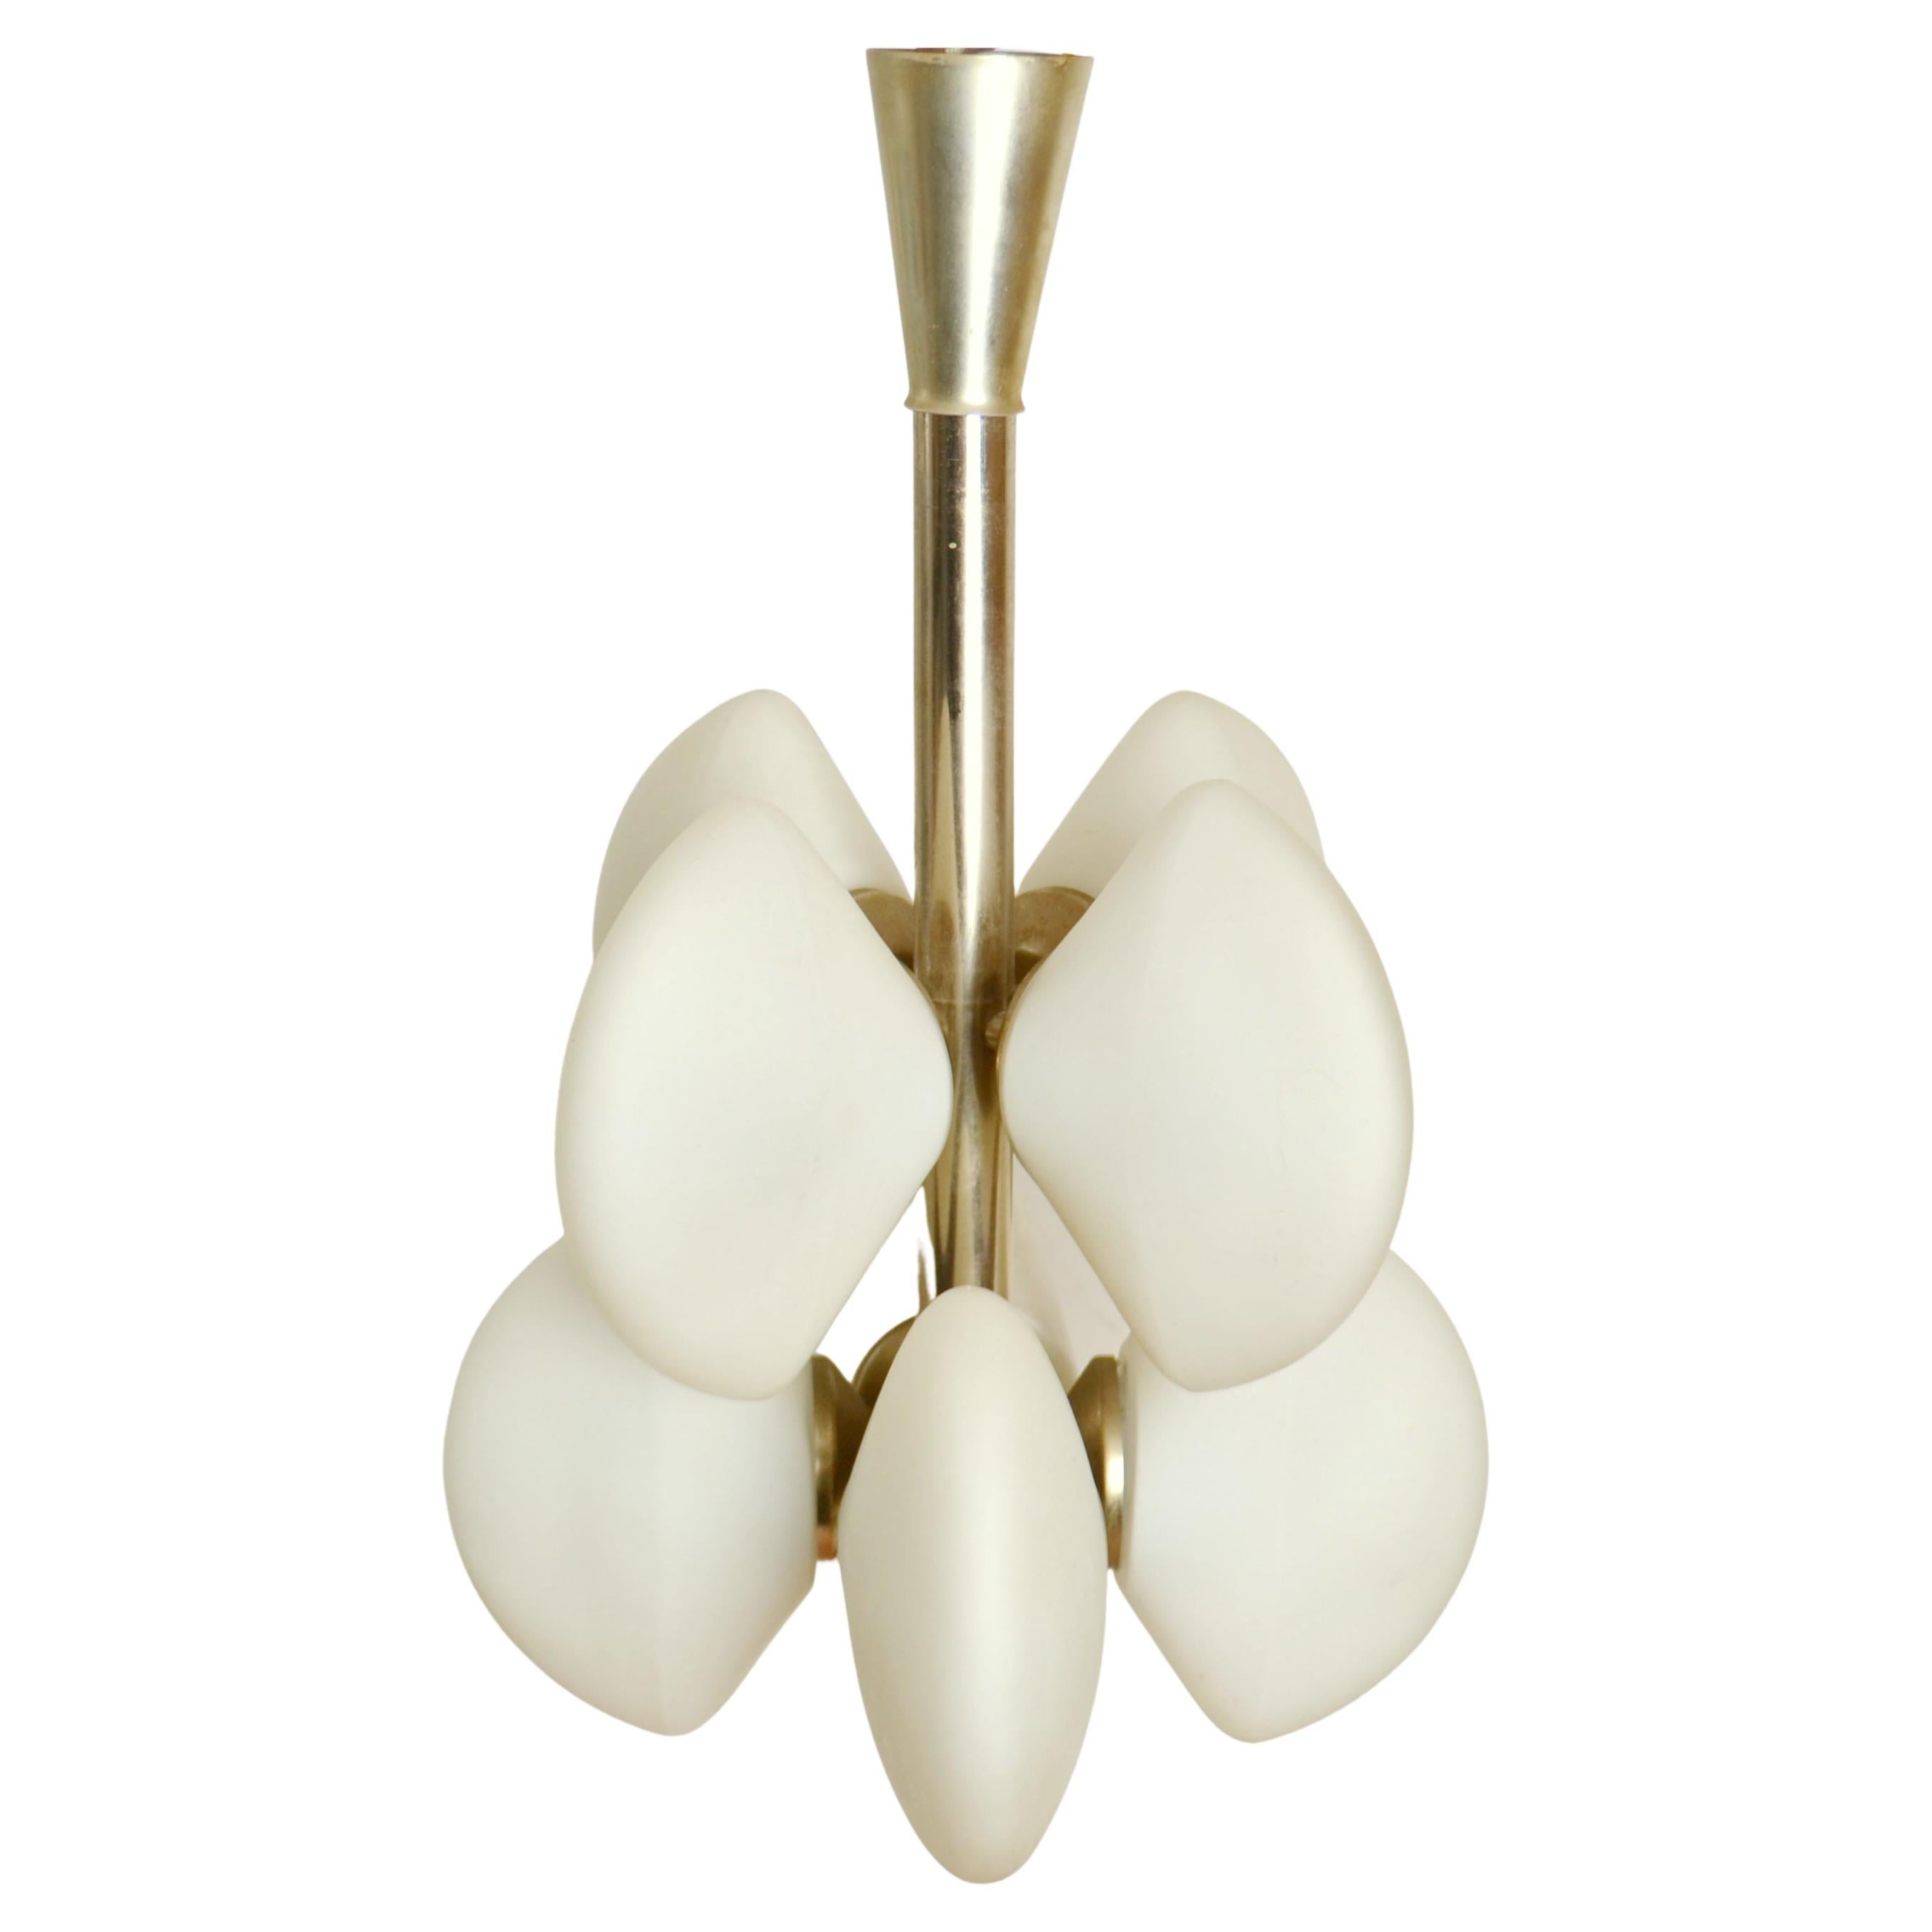 Flush mount 1960s Sputnik pendant with eight shell shape opalescent shades on chrome frame. It is a compact chandelier with unusual shape shades.